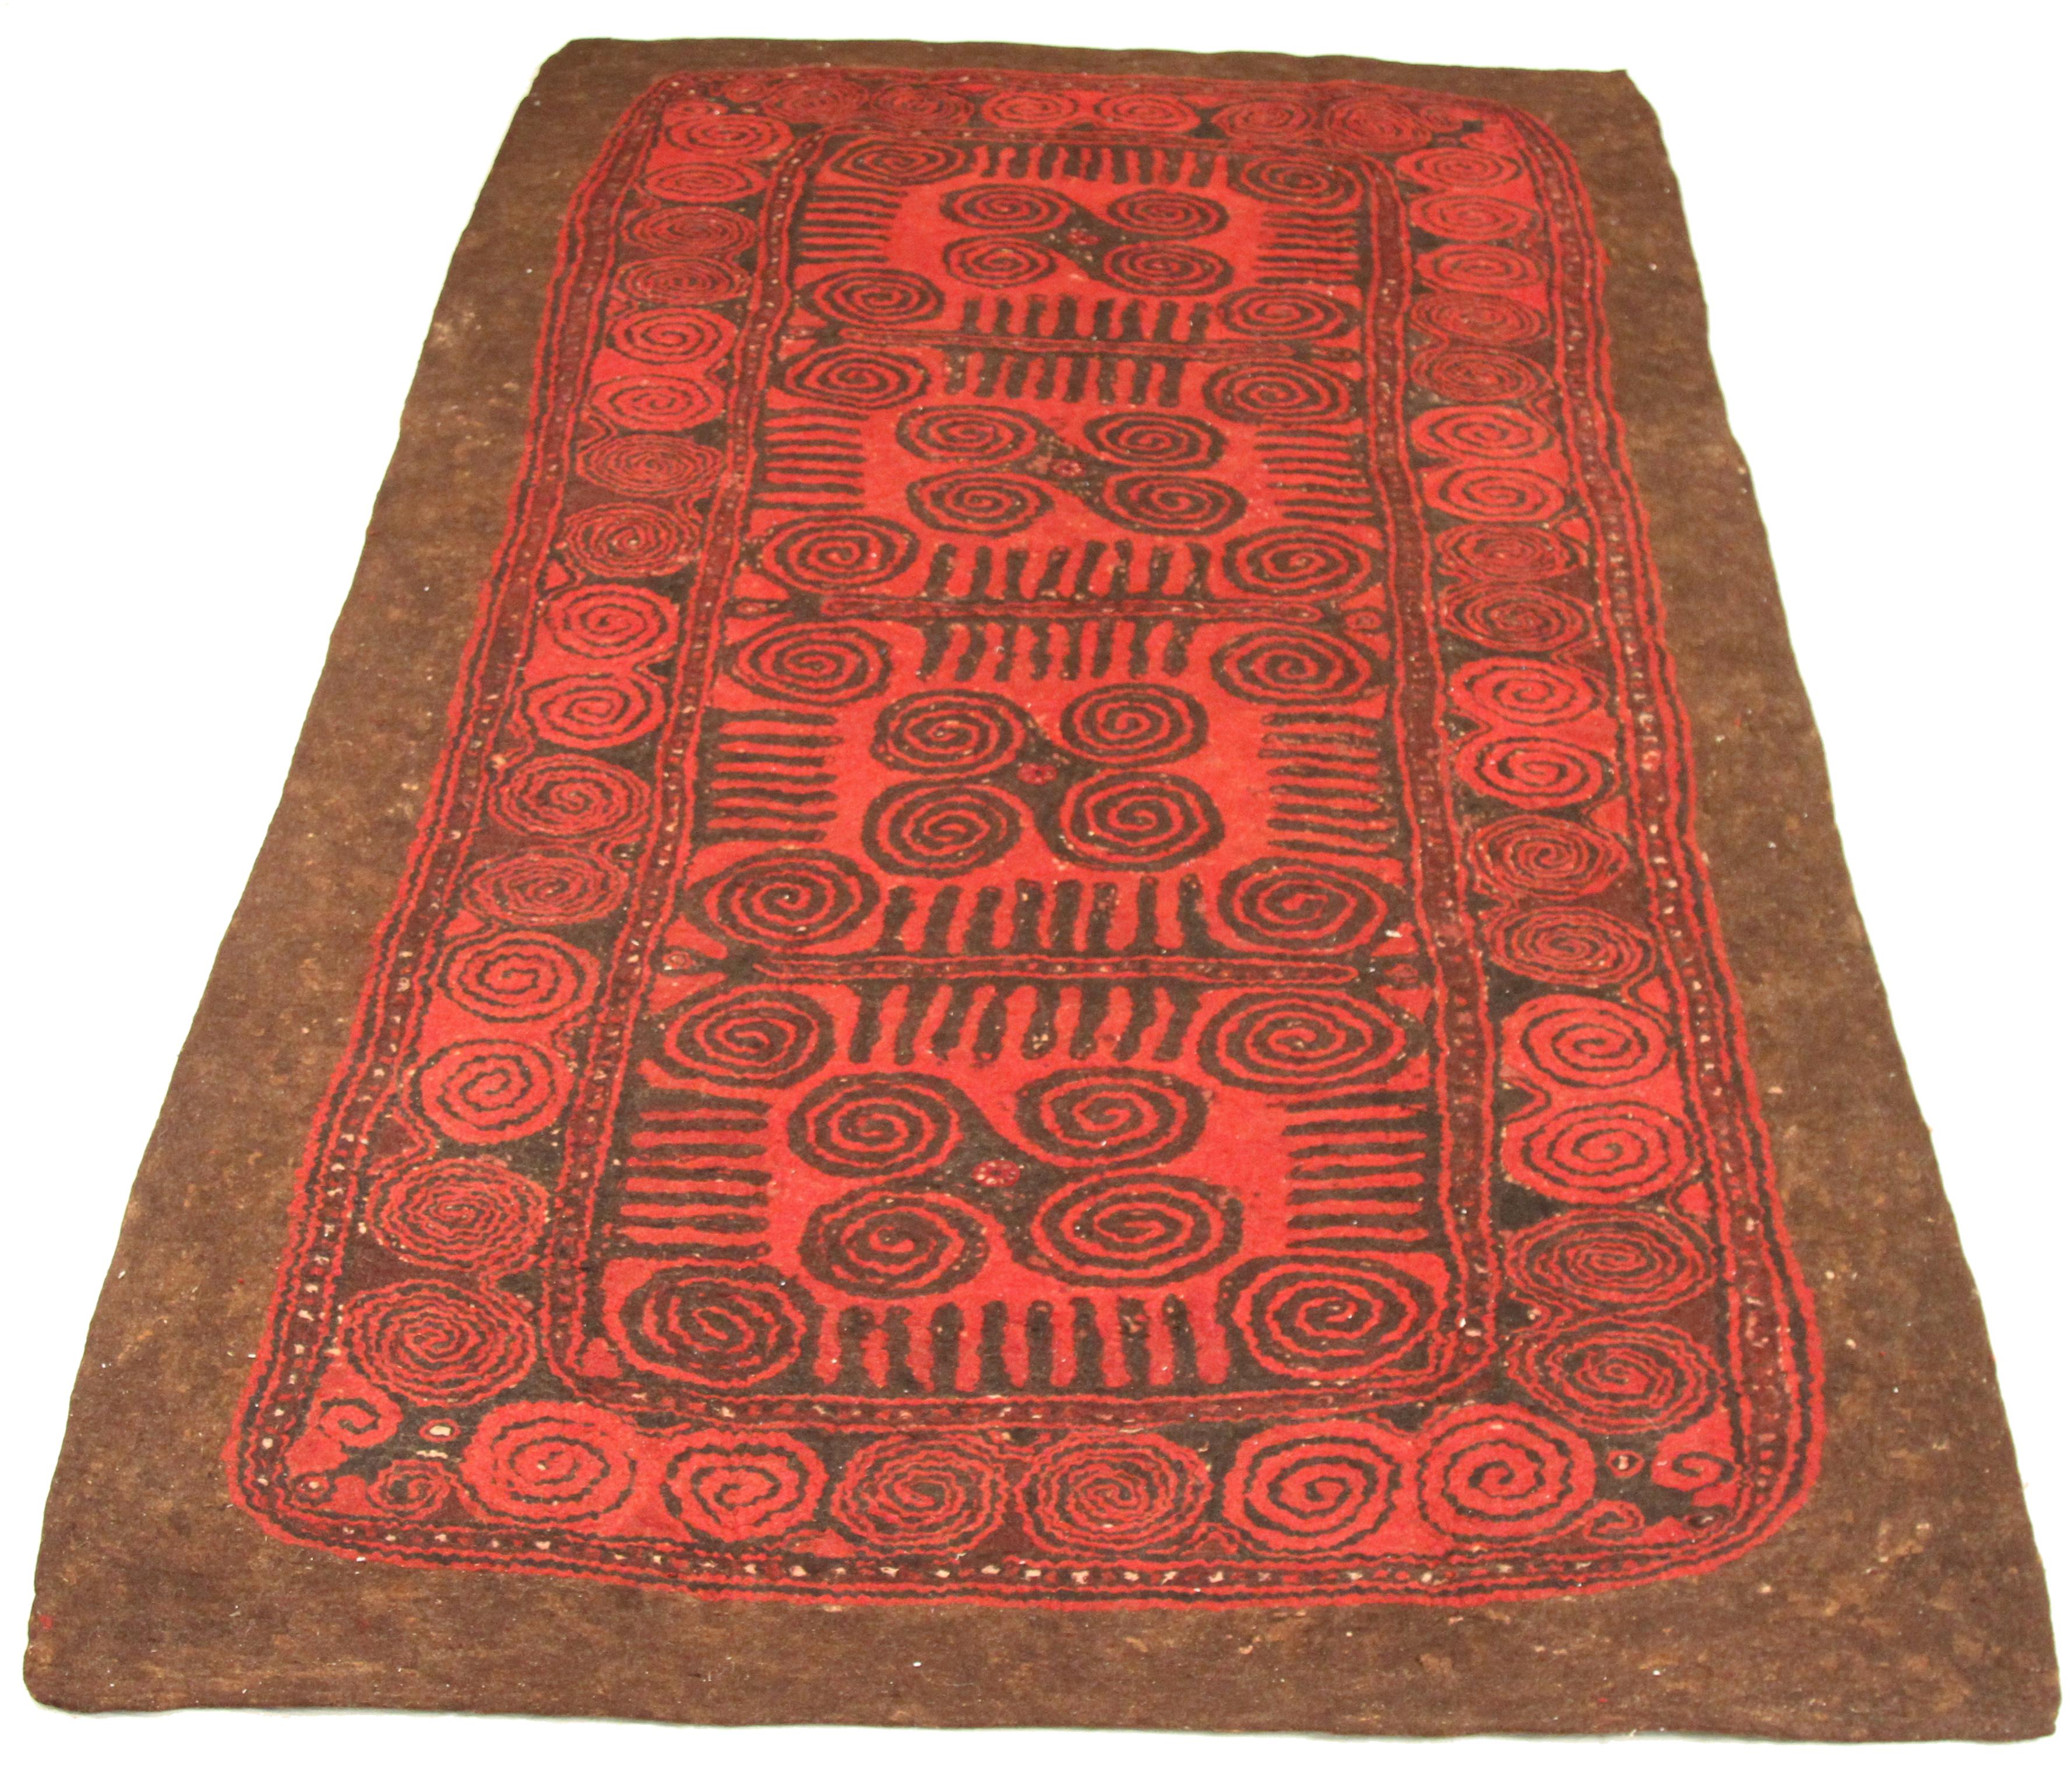 Vintage hand woven Persian rug made from fine wool and all-natural vegetable dyes that are safe for people and pets. This beautiful piece features simple patterns heavily influenced by nomadic lifestyle of different tribes in Iran. Nomad rugs are